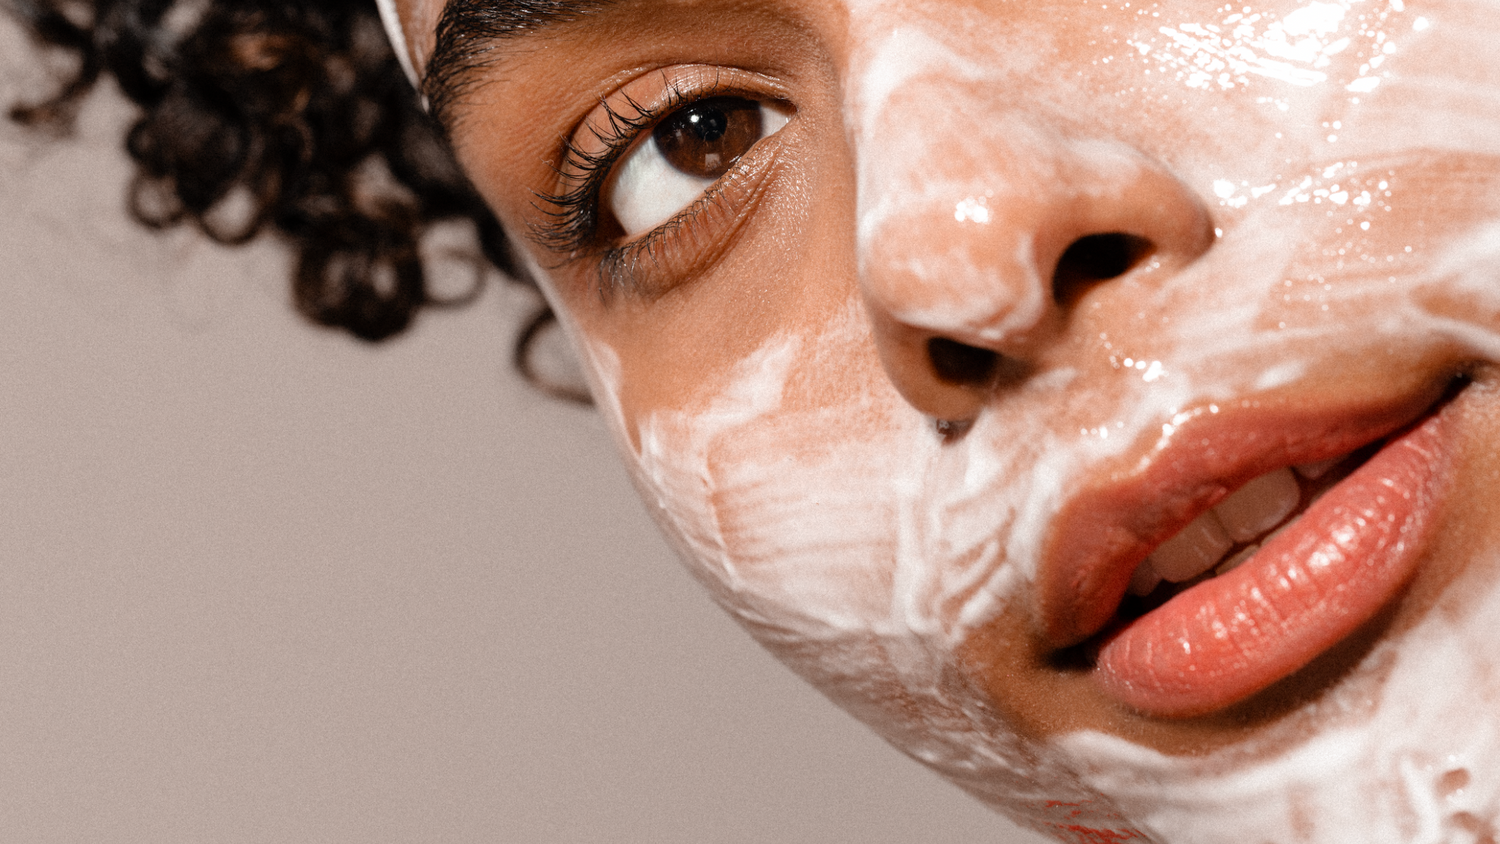 Discover your perfect moisturizer match. Our guide on how to choose the best moisturizer for your skin type has you covered.